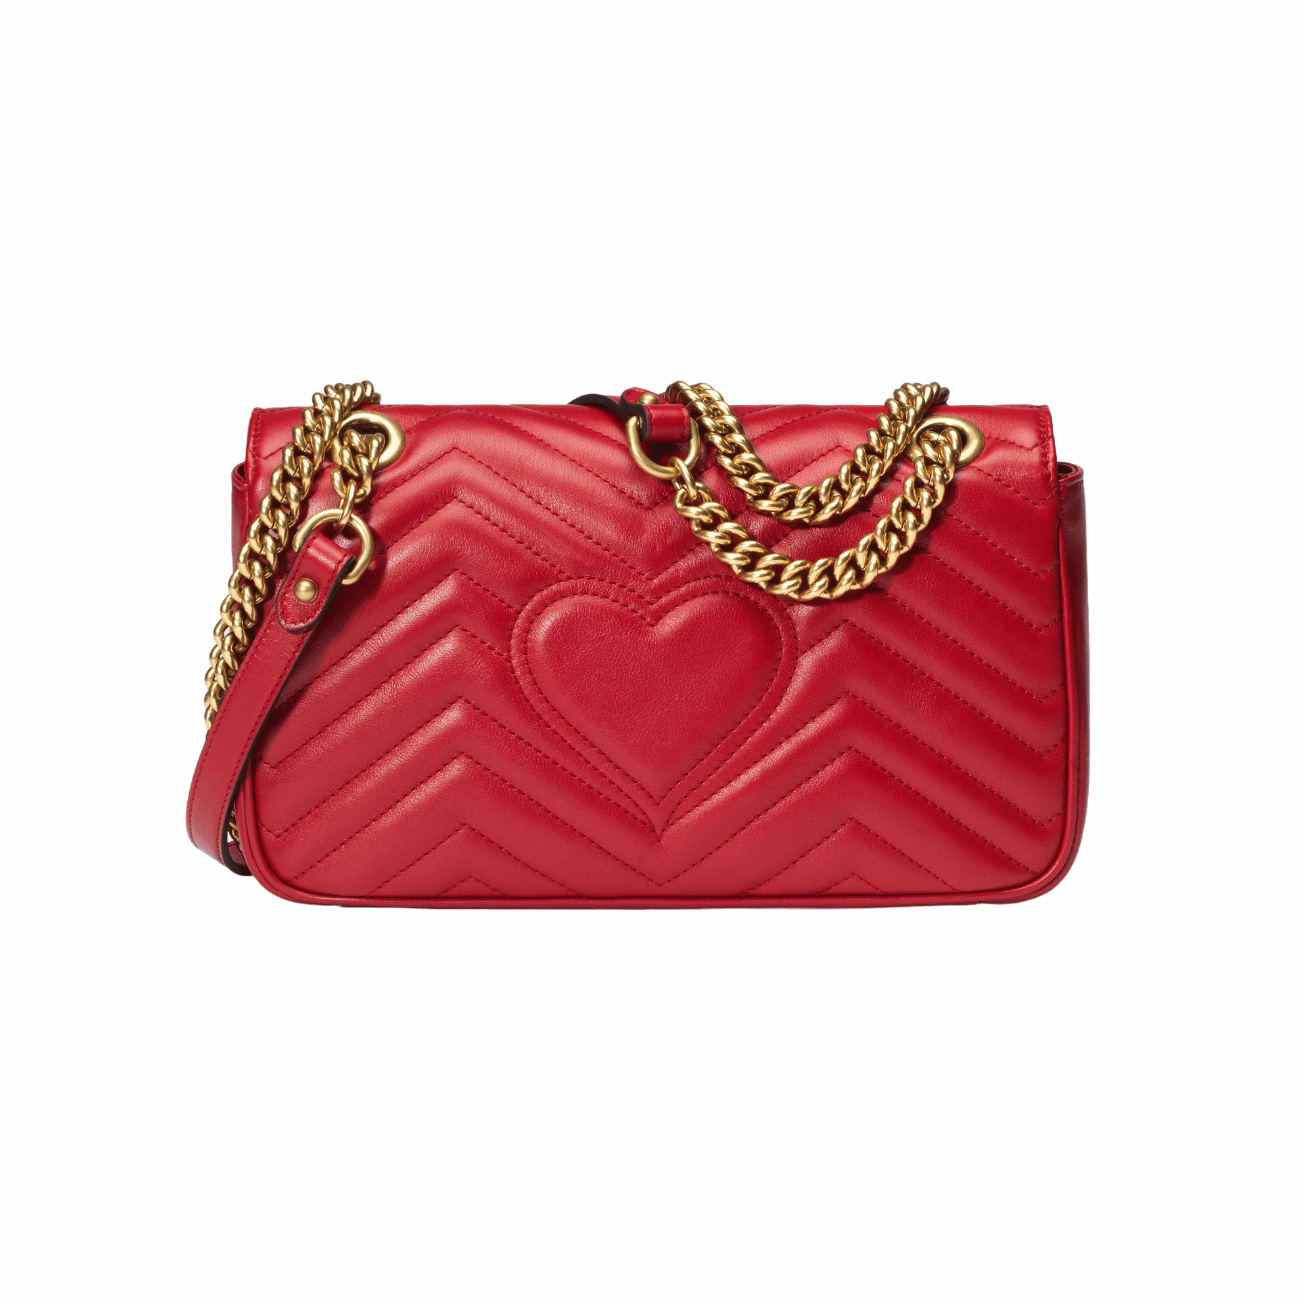 Gucci ‎443497 DTDID 6433 GG Marmont Small Shoulder Bag, Red